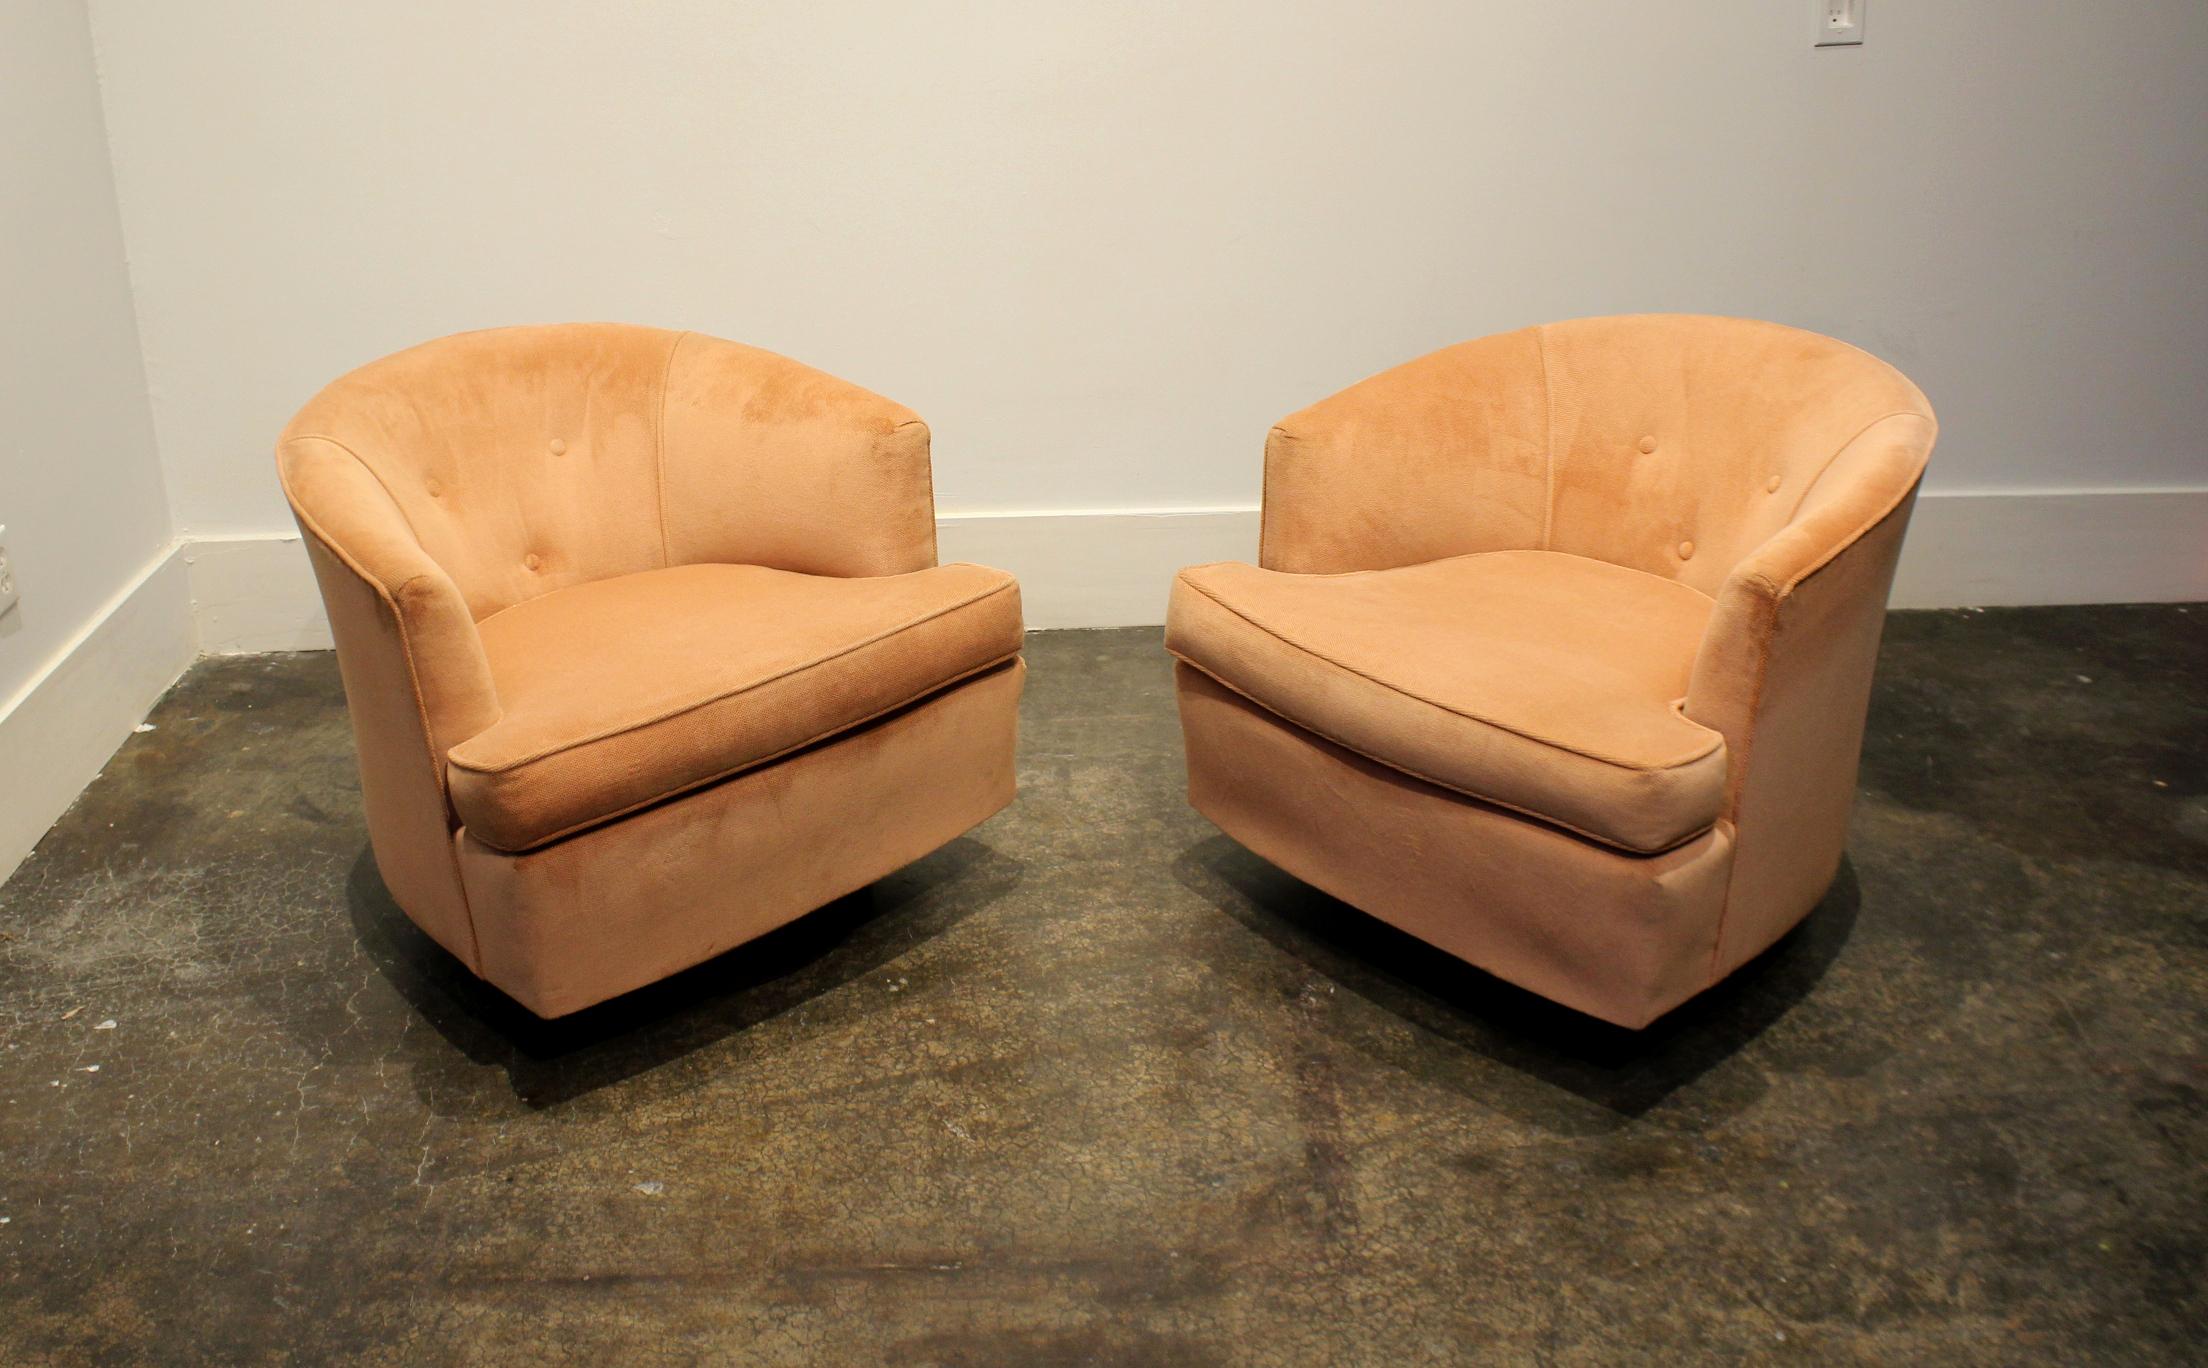 Pair of vintage Baughman-style swivel club chairs in salmon pink with circular walnut wood bases. Chairs are from 1970s-1980s, rock and swivel and are sturdy and function smoothly. Some minor wear to upholstery. (see pictures).